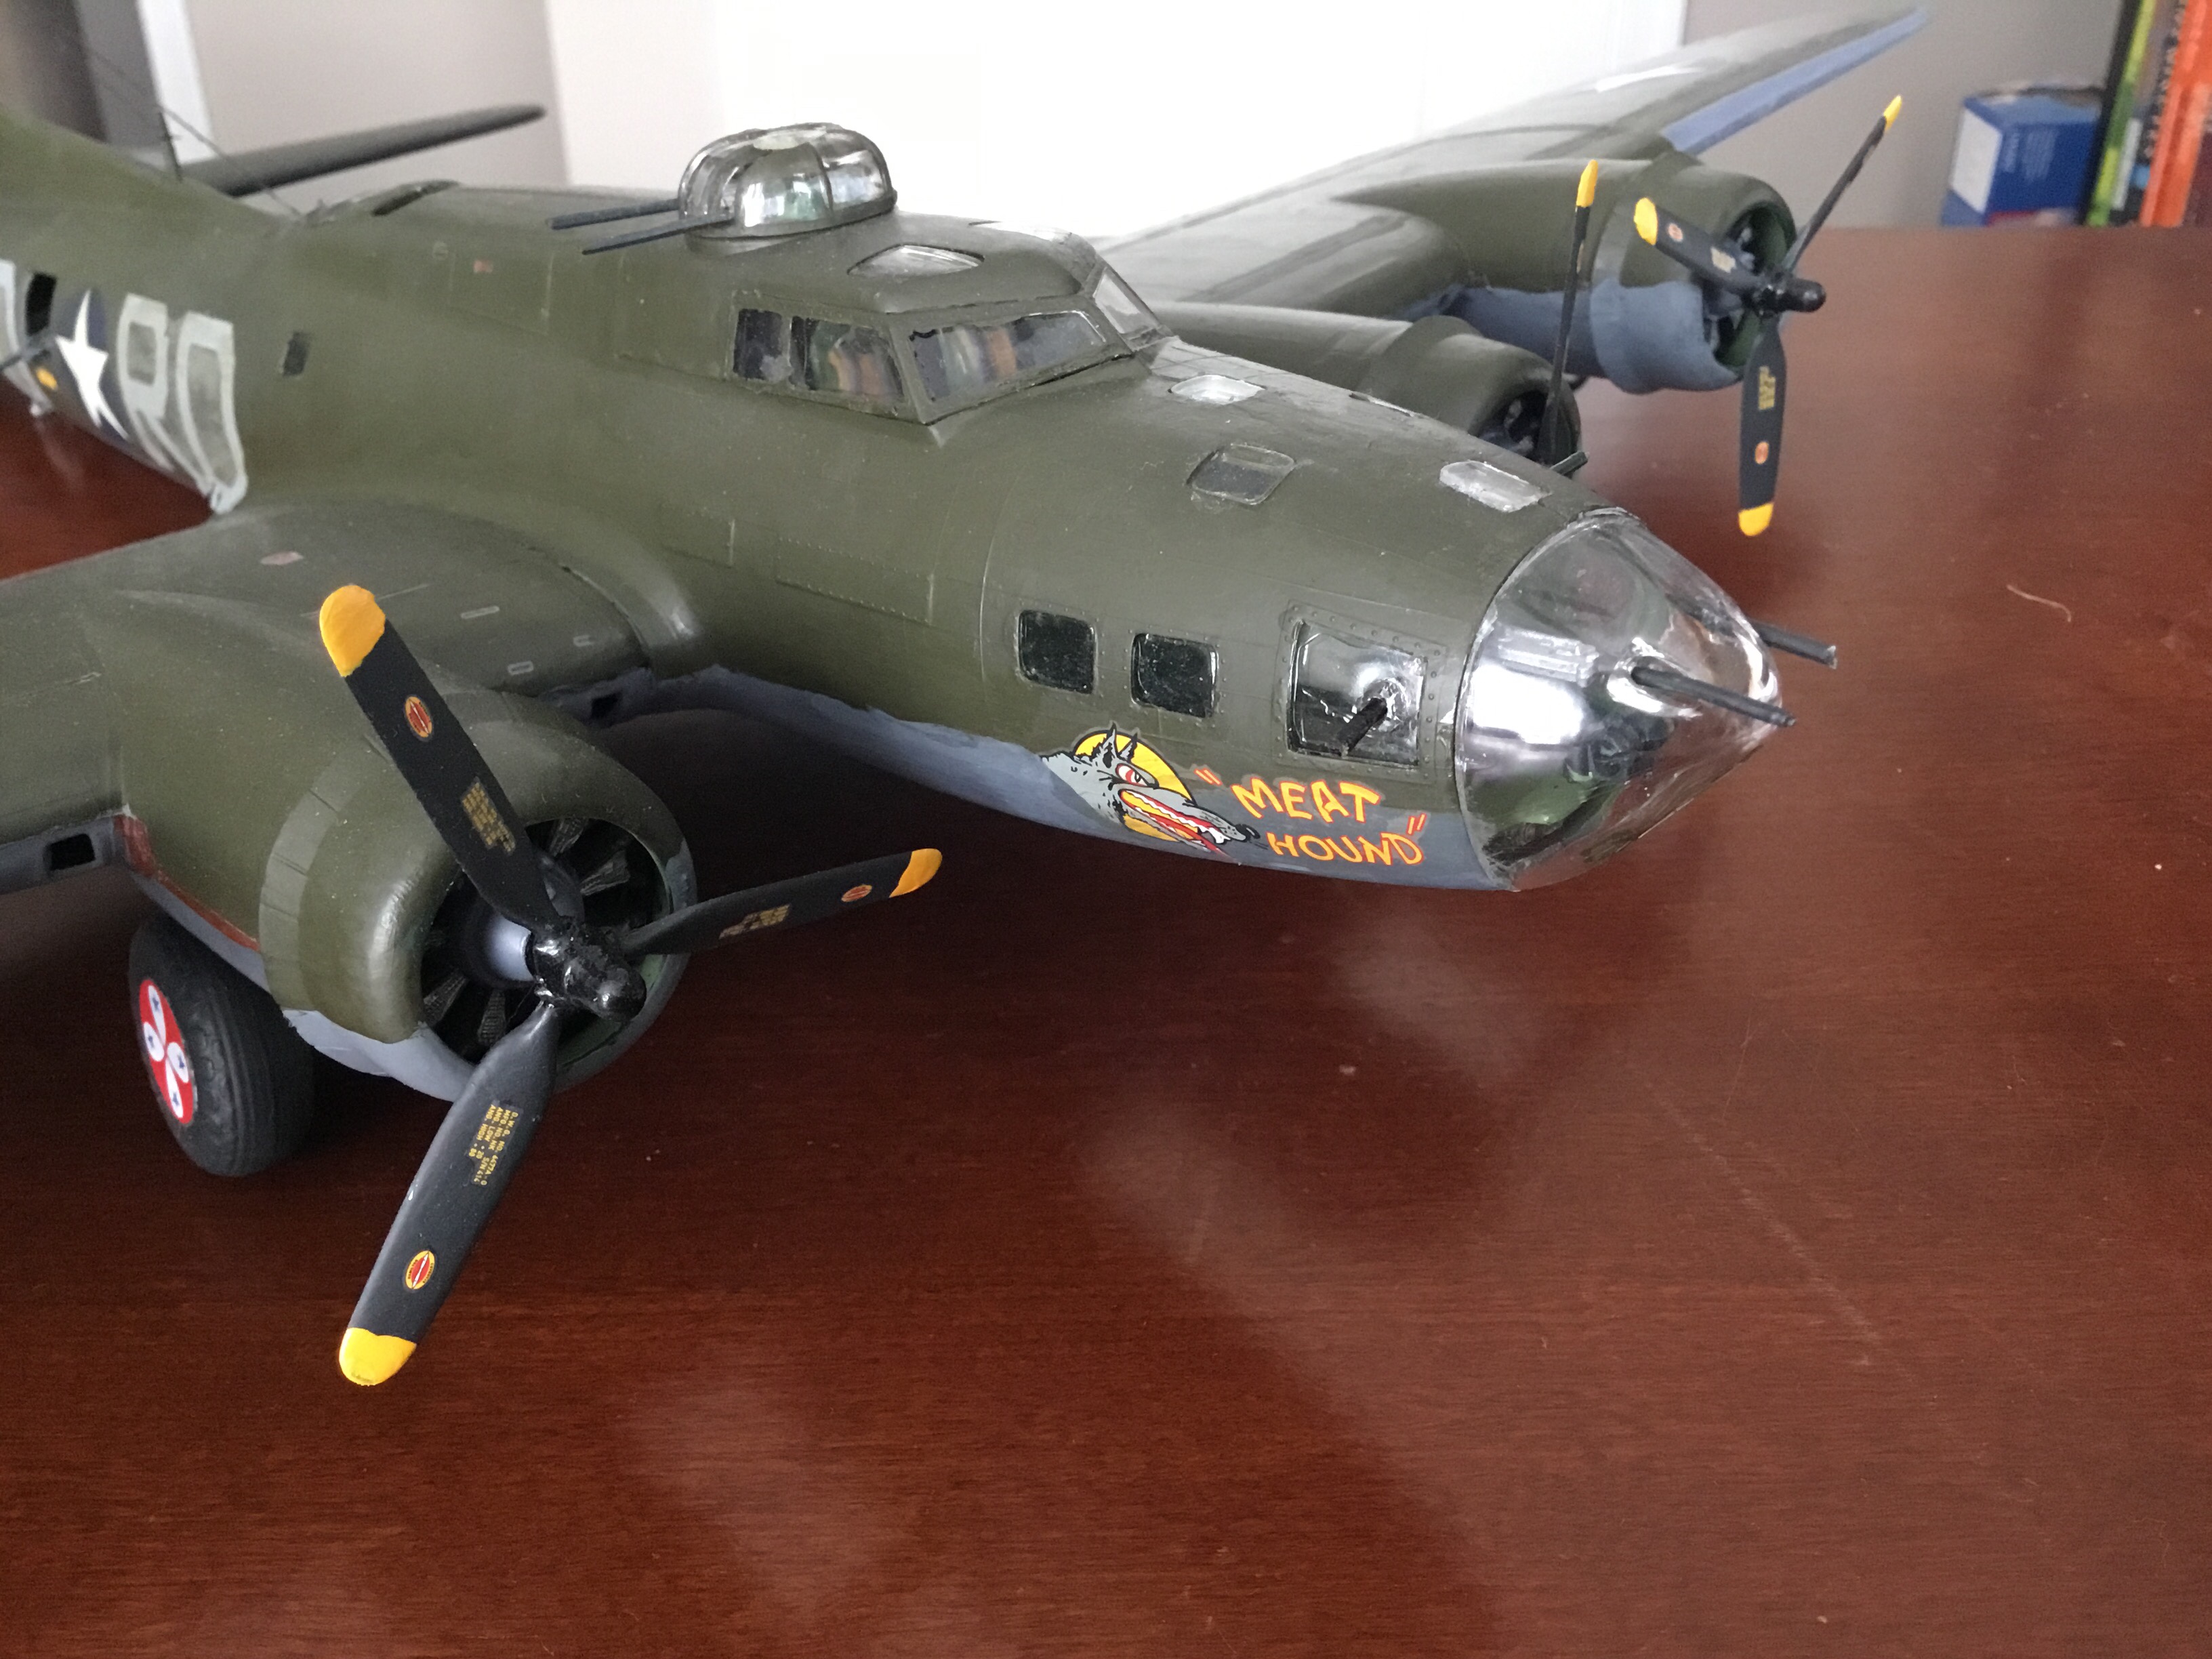 B-17F “Meat Hound”; Tail Number 229524